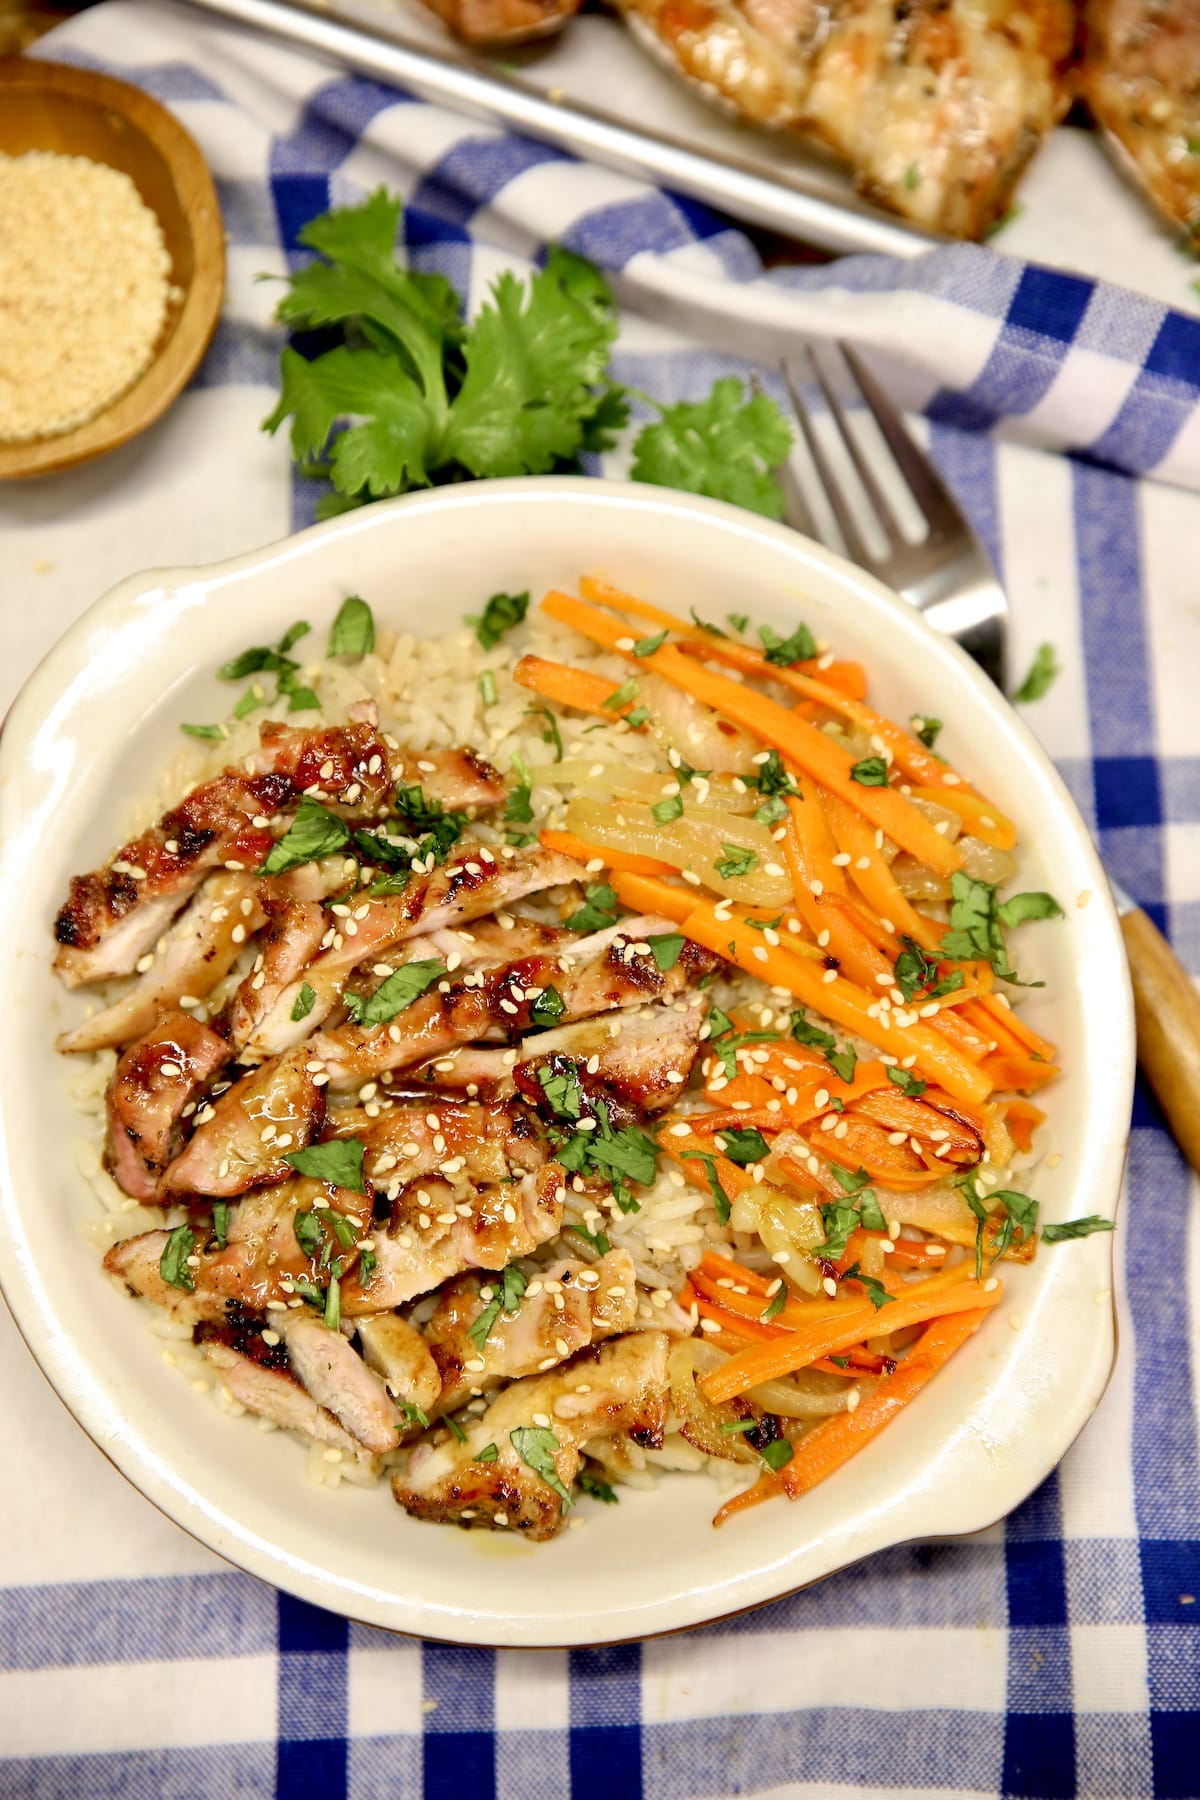 Grilled chicken bowl with julienned carrots.